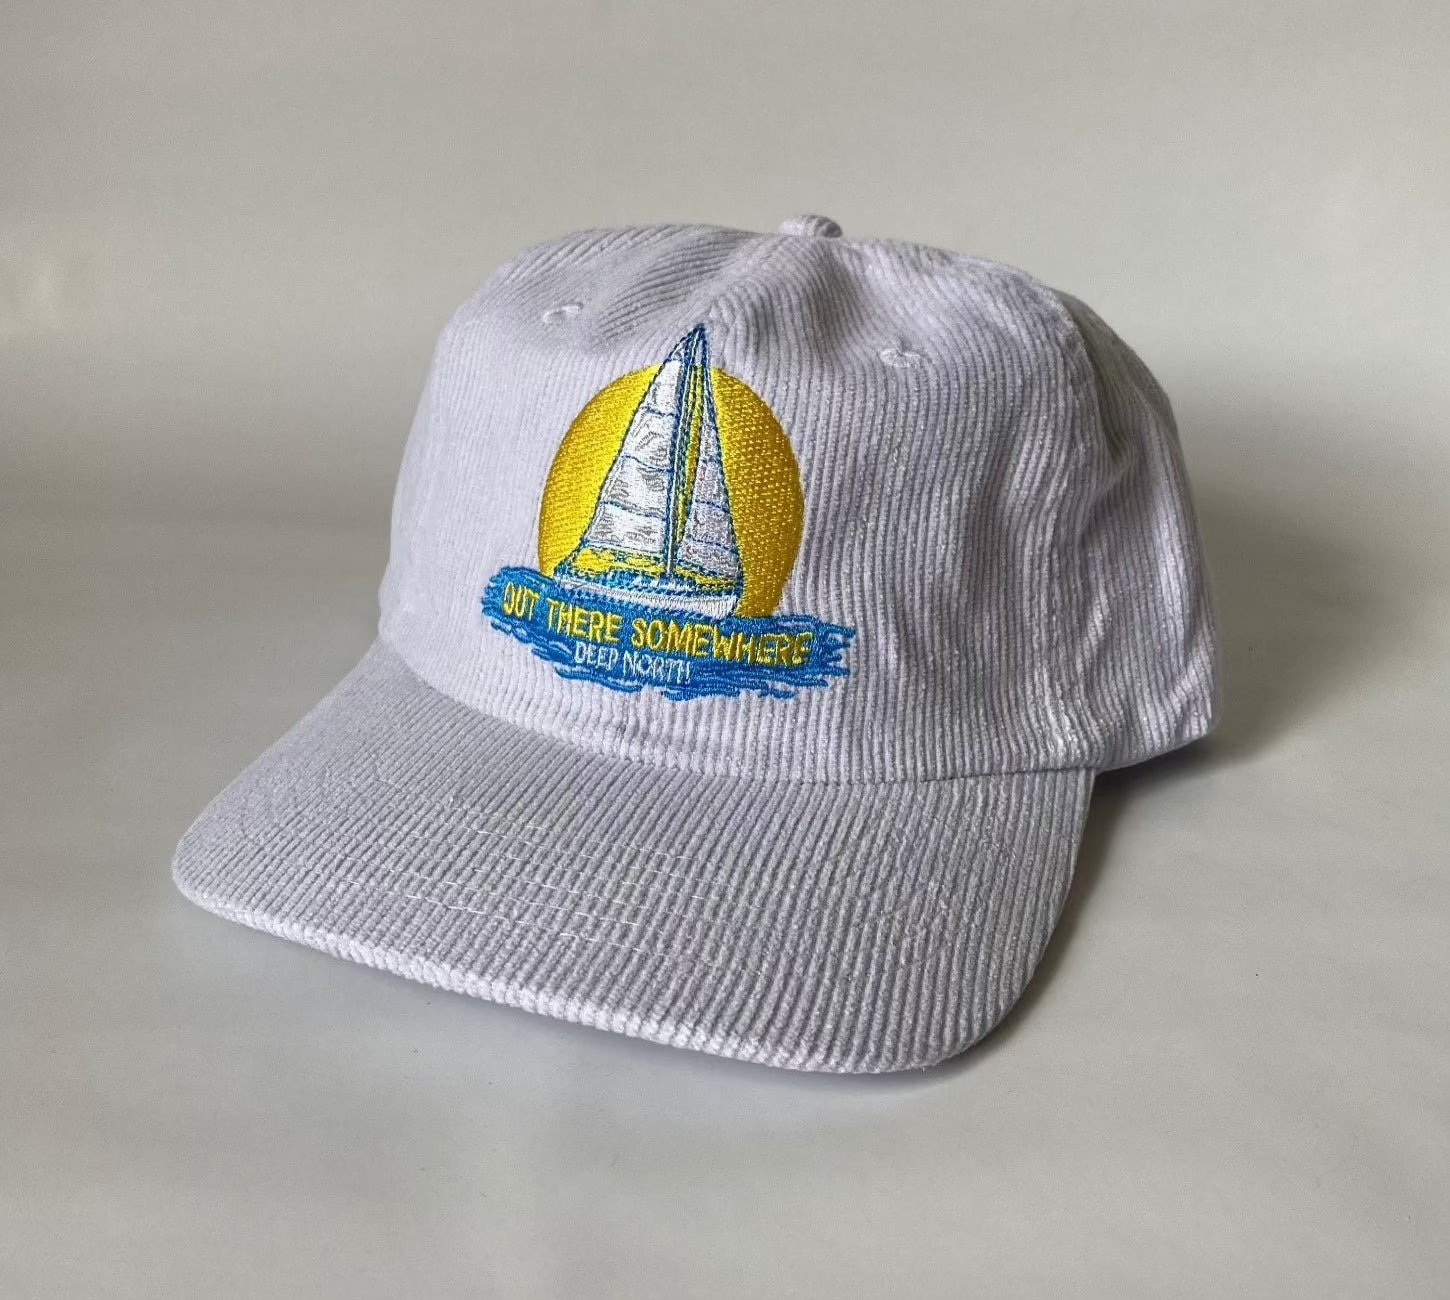 Out There Somewhere Sailing Corduroy Hat – DEEP NORTH